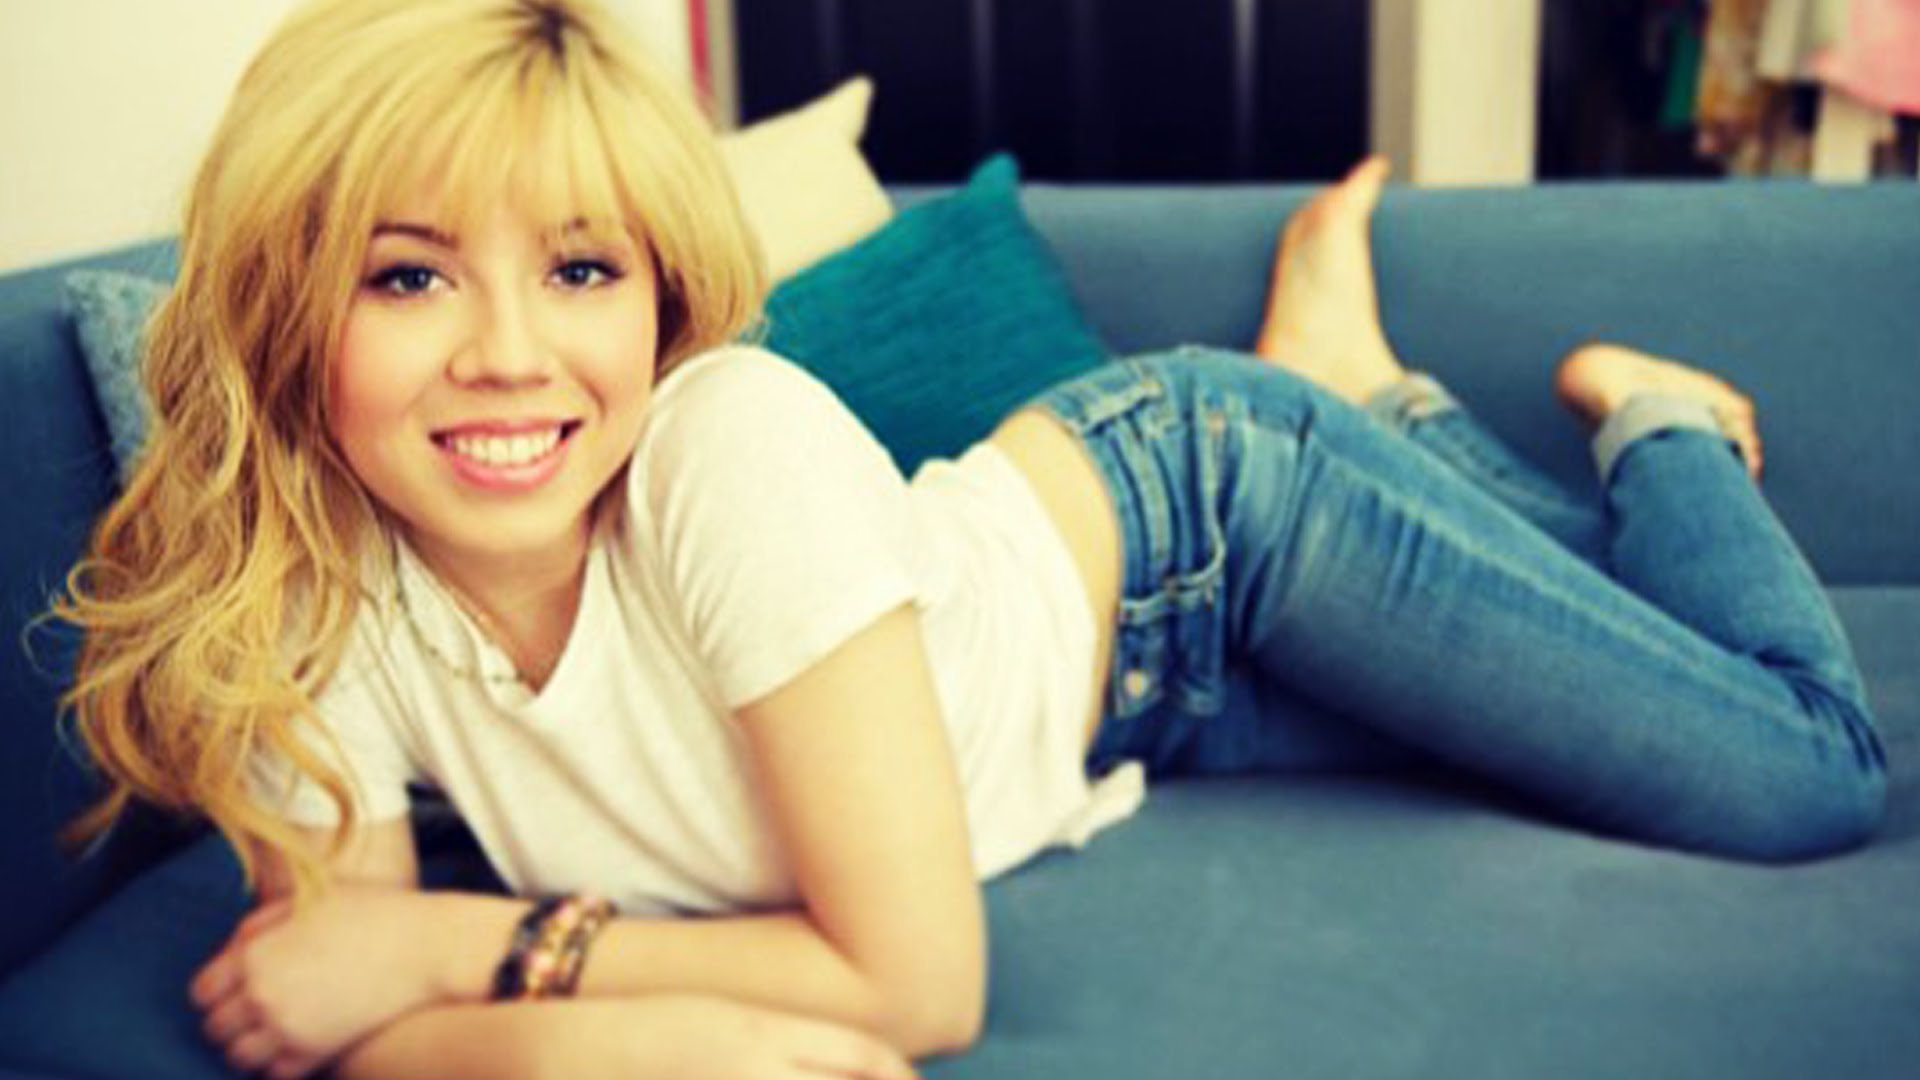 Jennette McCurdy Wallpapers